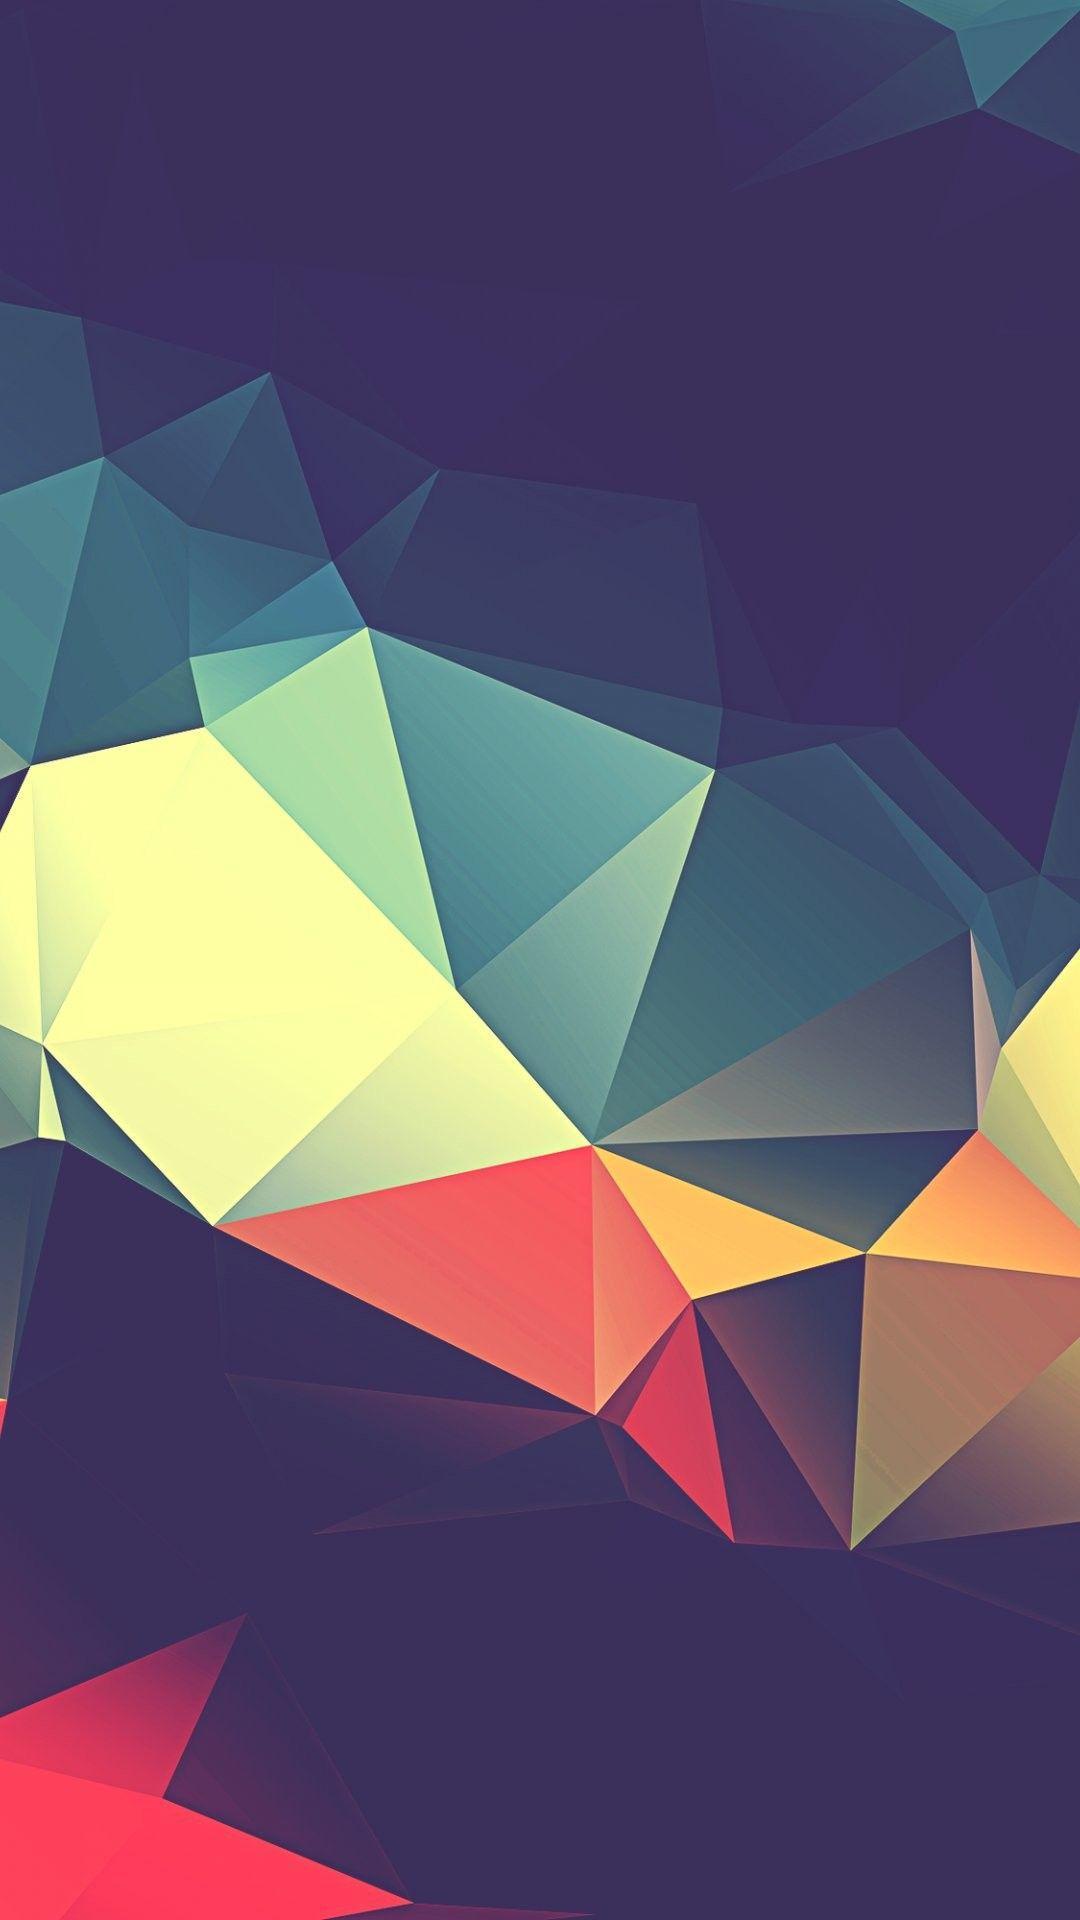 High Def Collection: 44 Full HD Low Poly Wallpaper (In Full HD, PAI)